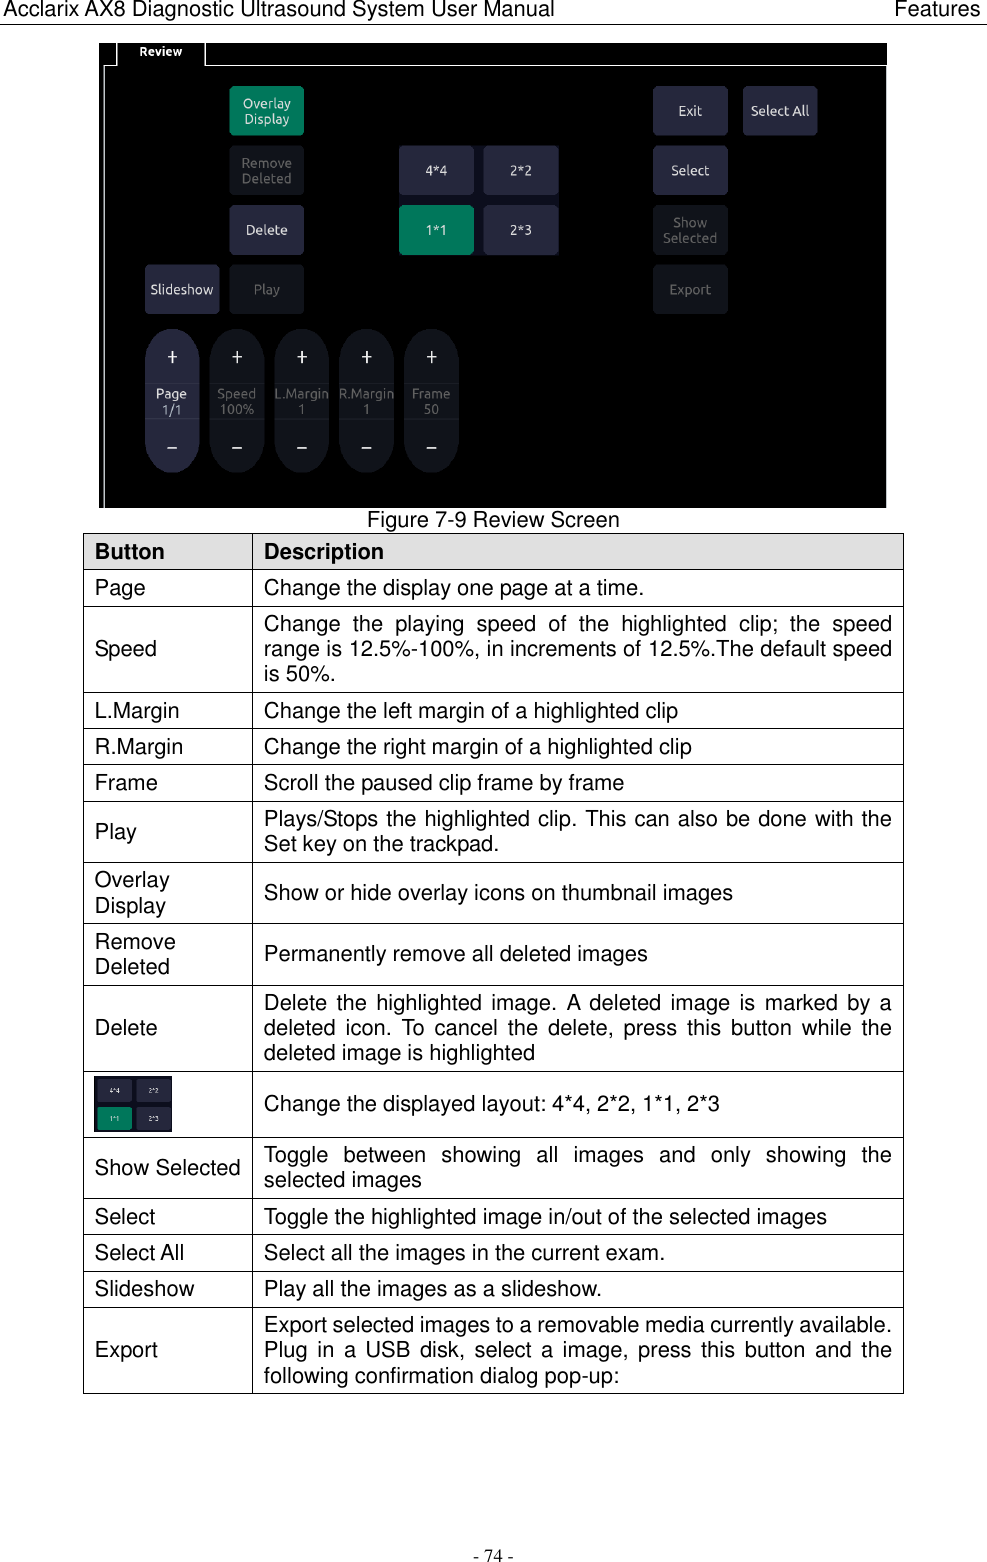 Acclarix AX8 Diagnostic Ultrasound System User Manual                                                              Features - 74 -  Figure 7-9 Review Screen Button Description Page Change the display one page at a time.   Speed Change  the  playing  speed  of  the  highlighted  clip;  the  speed range is 12.5%-100%, in increments of 12.5%.The default speed is 50%. L.Margin Change the left margin of a highlighted clip R.Margin Change the right margin of a highlighted clip Frame Scroll the paused clip frame by frame Play Plays/Stops the highlighted clip. This can also be done with the Set key on the trackpad. Overlay Display Show or hide overlay icons on thumbnail images Remove Deleted Permanently remove all deleted images Delete Delete the highlighted image. A deleted image  is  marked by a deleted  icon.  To  cancel  the  delete,  press  this  button  while  the deleted image is highlighted  Change the displayed layout: 4*4, 2*2, 1*1, 2*3 Show Selected Toggle  between  showing  all  images  and  only  showing  the selected images Select Toggle the highlighted image in/out of the selected images Select All Select all the images in the current exam. Slideshow Play all the images as a slideshow. Export Export selected images to a removable media currently available. Plug in  a USB disk, select a image, press this  button and  the following confirmation dialog pop-up: 